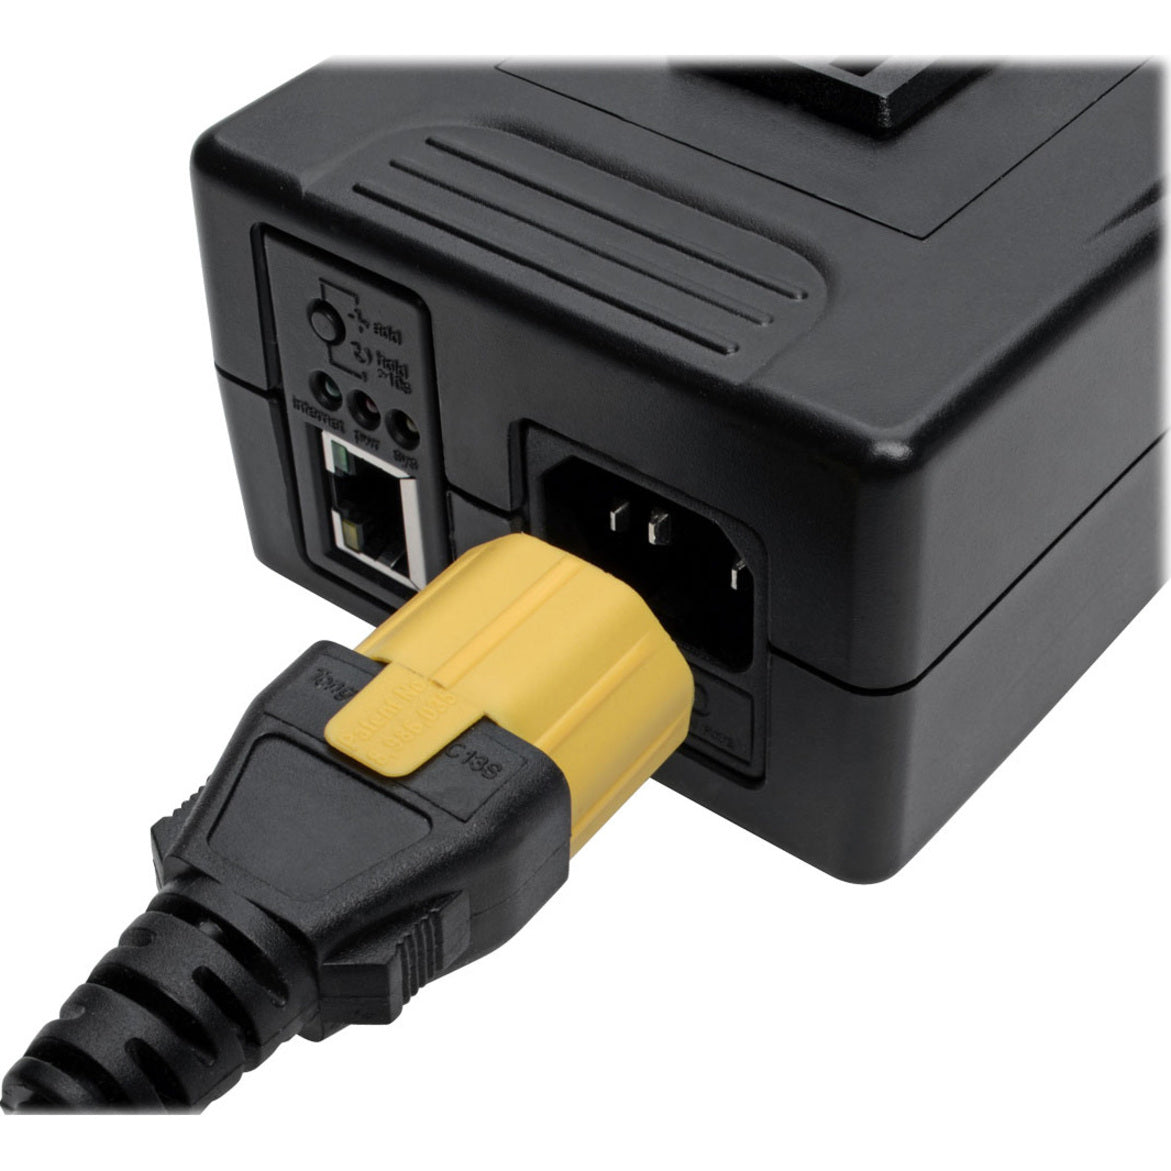 Tripp Lite PLC14YW Plug-Lock Inserts, Yellow - Secure and Protect Your Power Cords